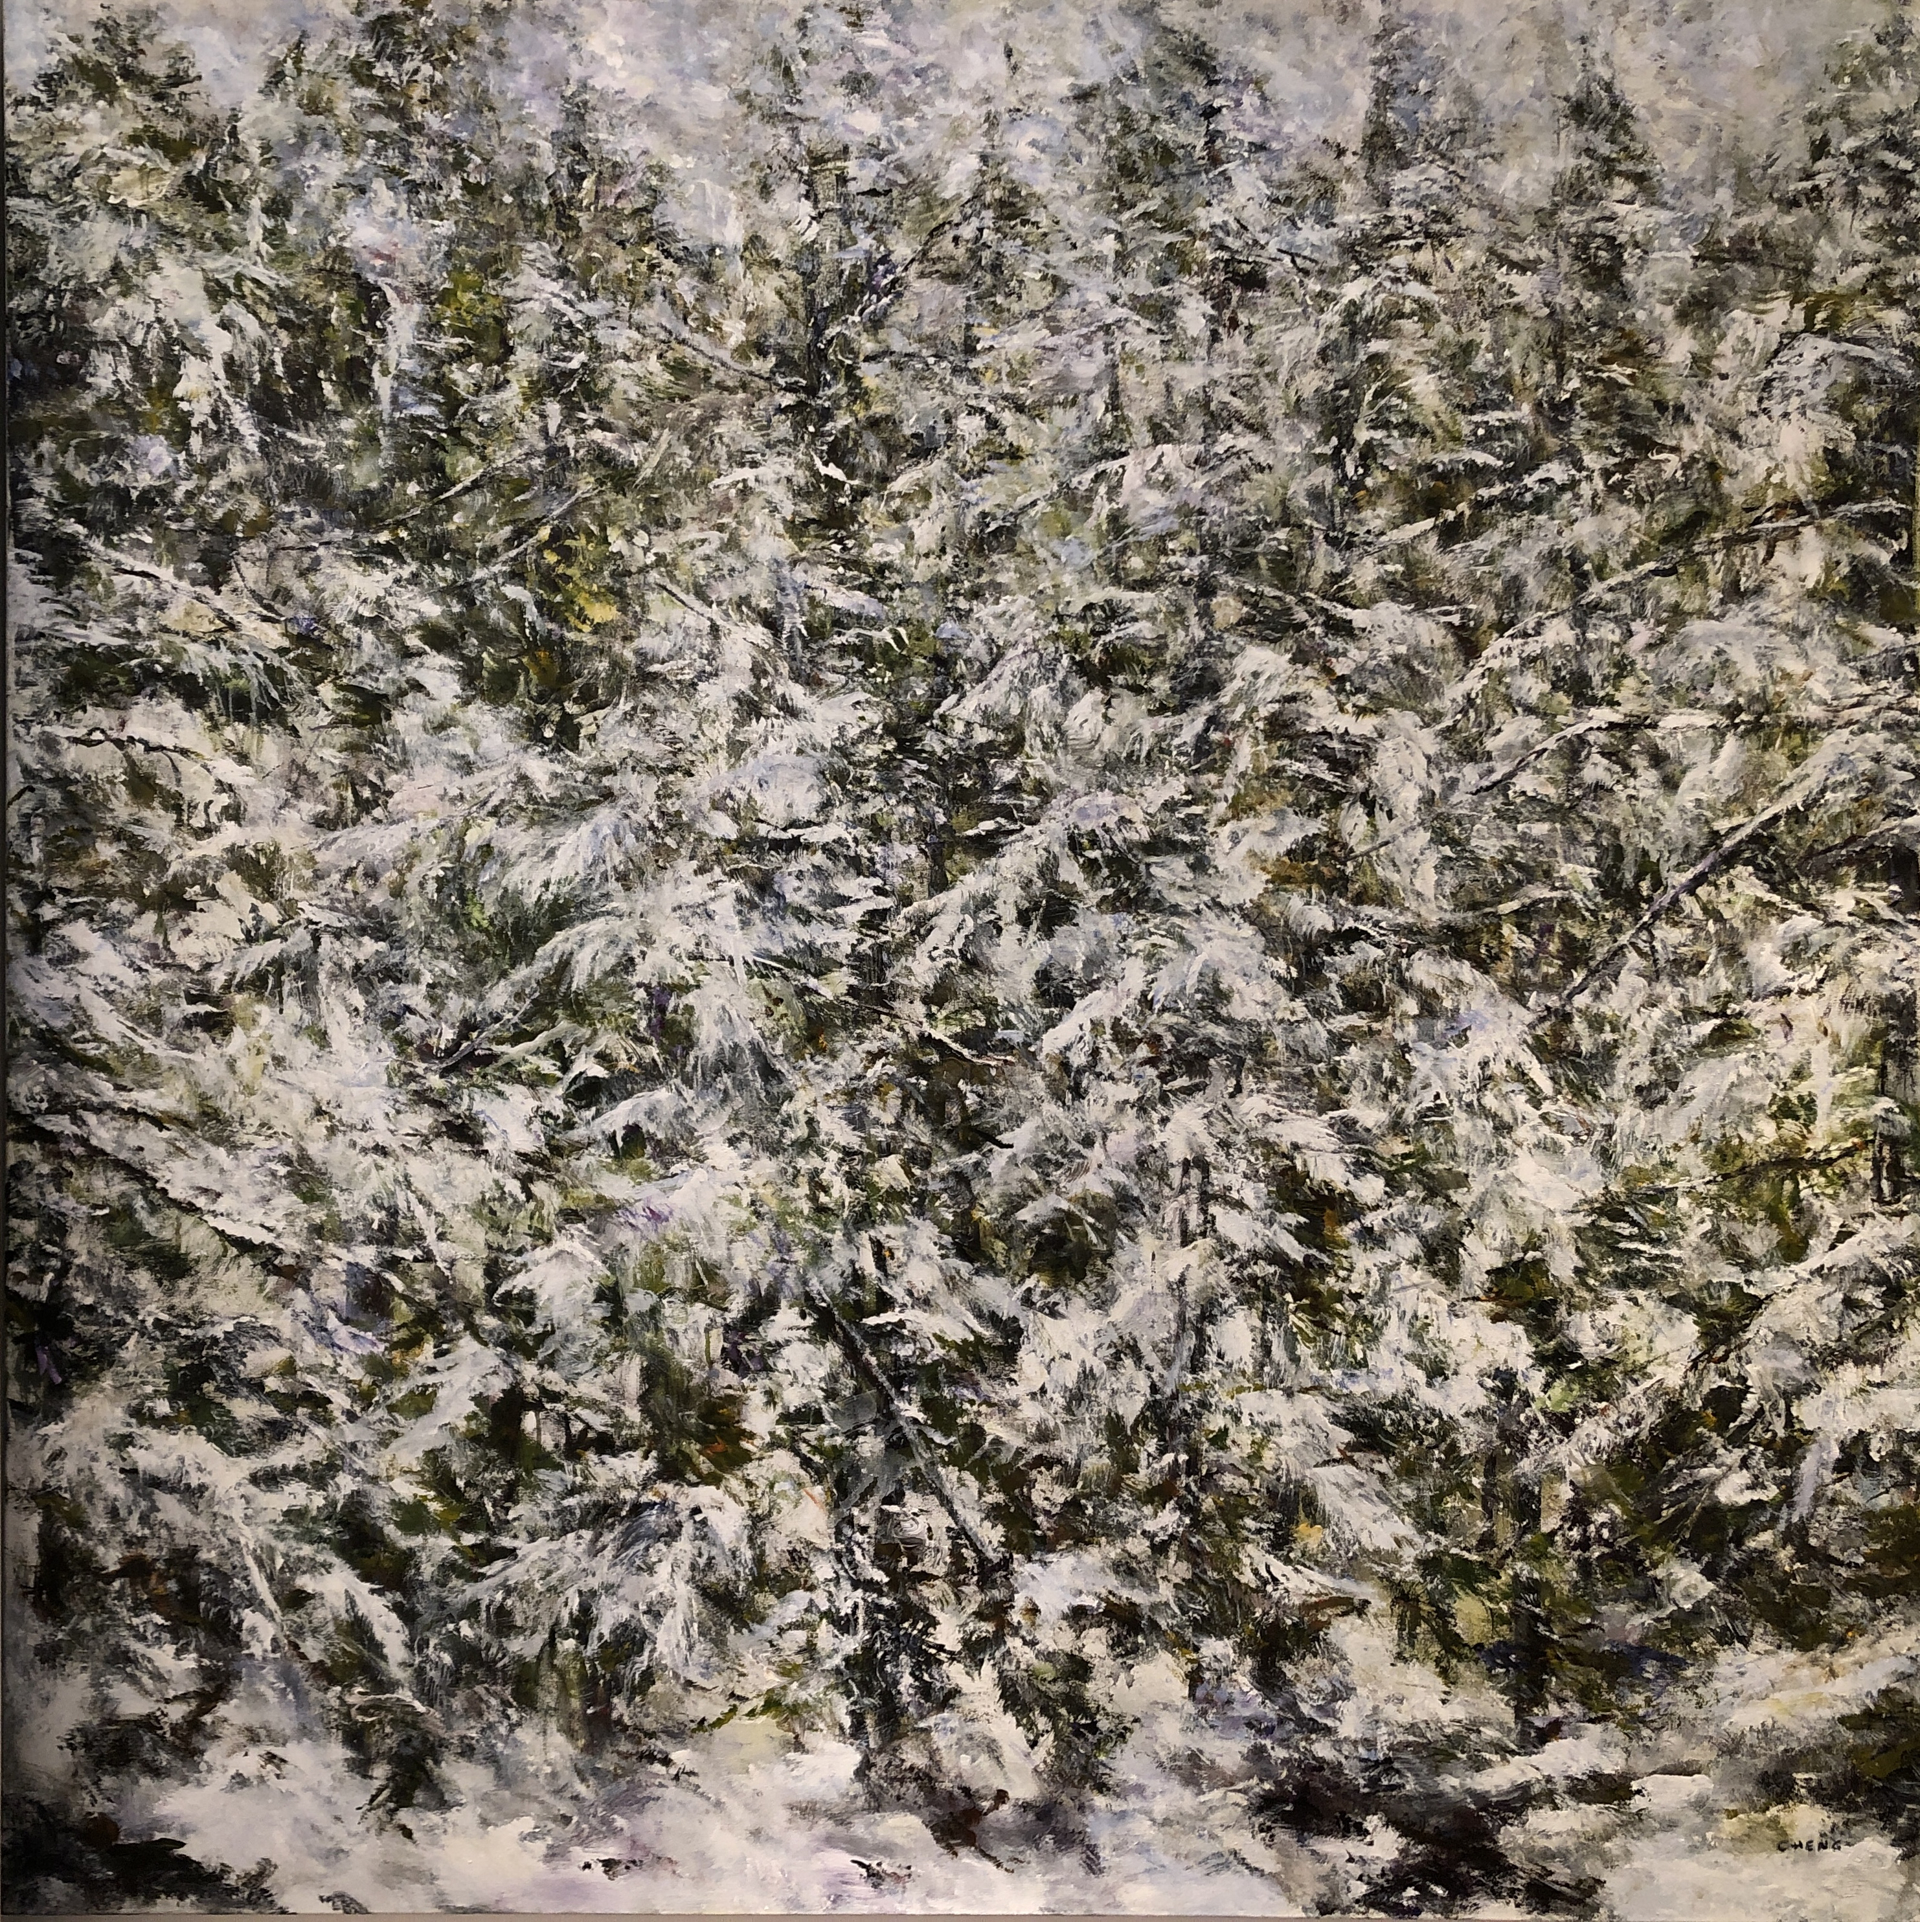 Snow Covered Forest by Judy Cheng